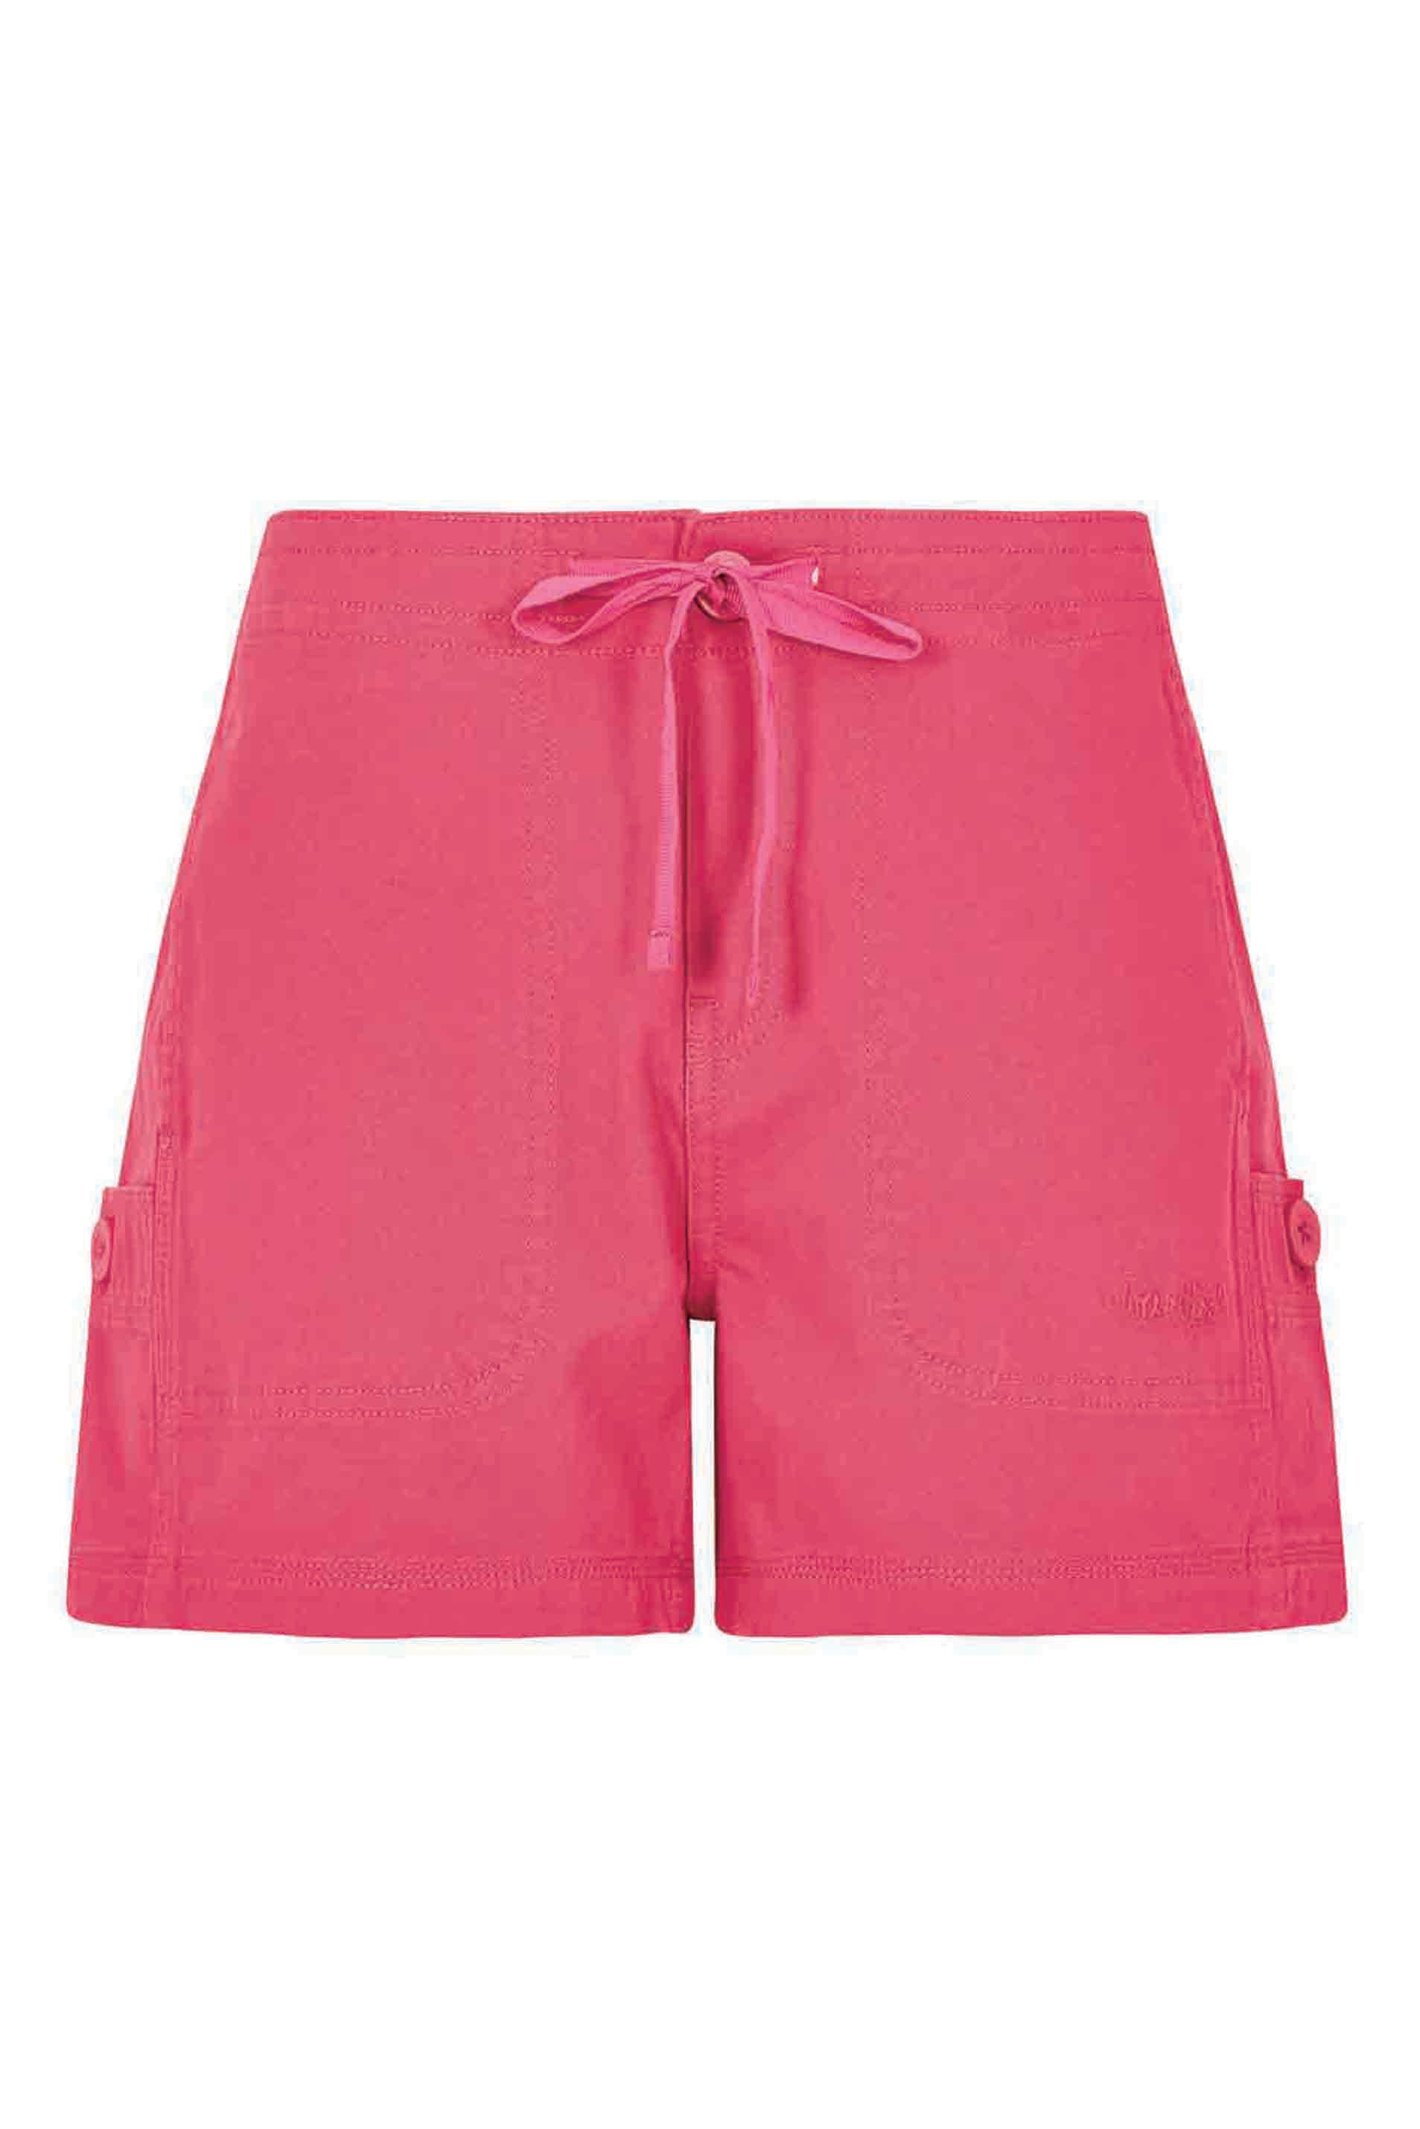 Weird Fish Willoughby Summer Shorts Hot Pink Size 22